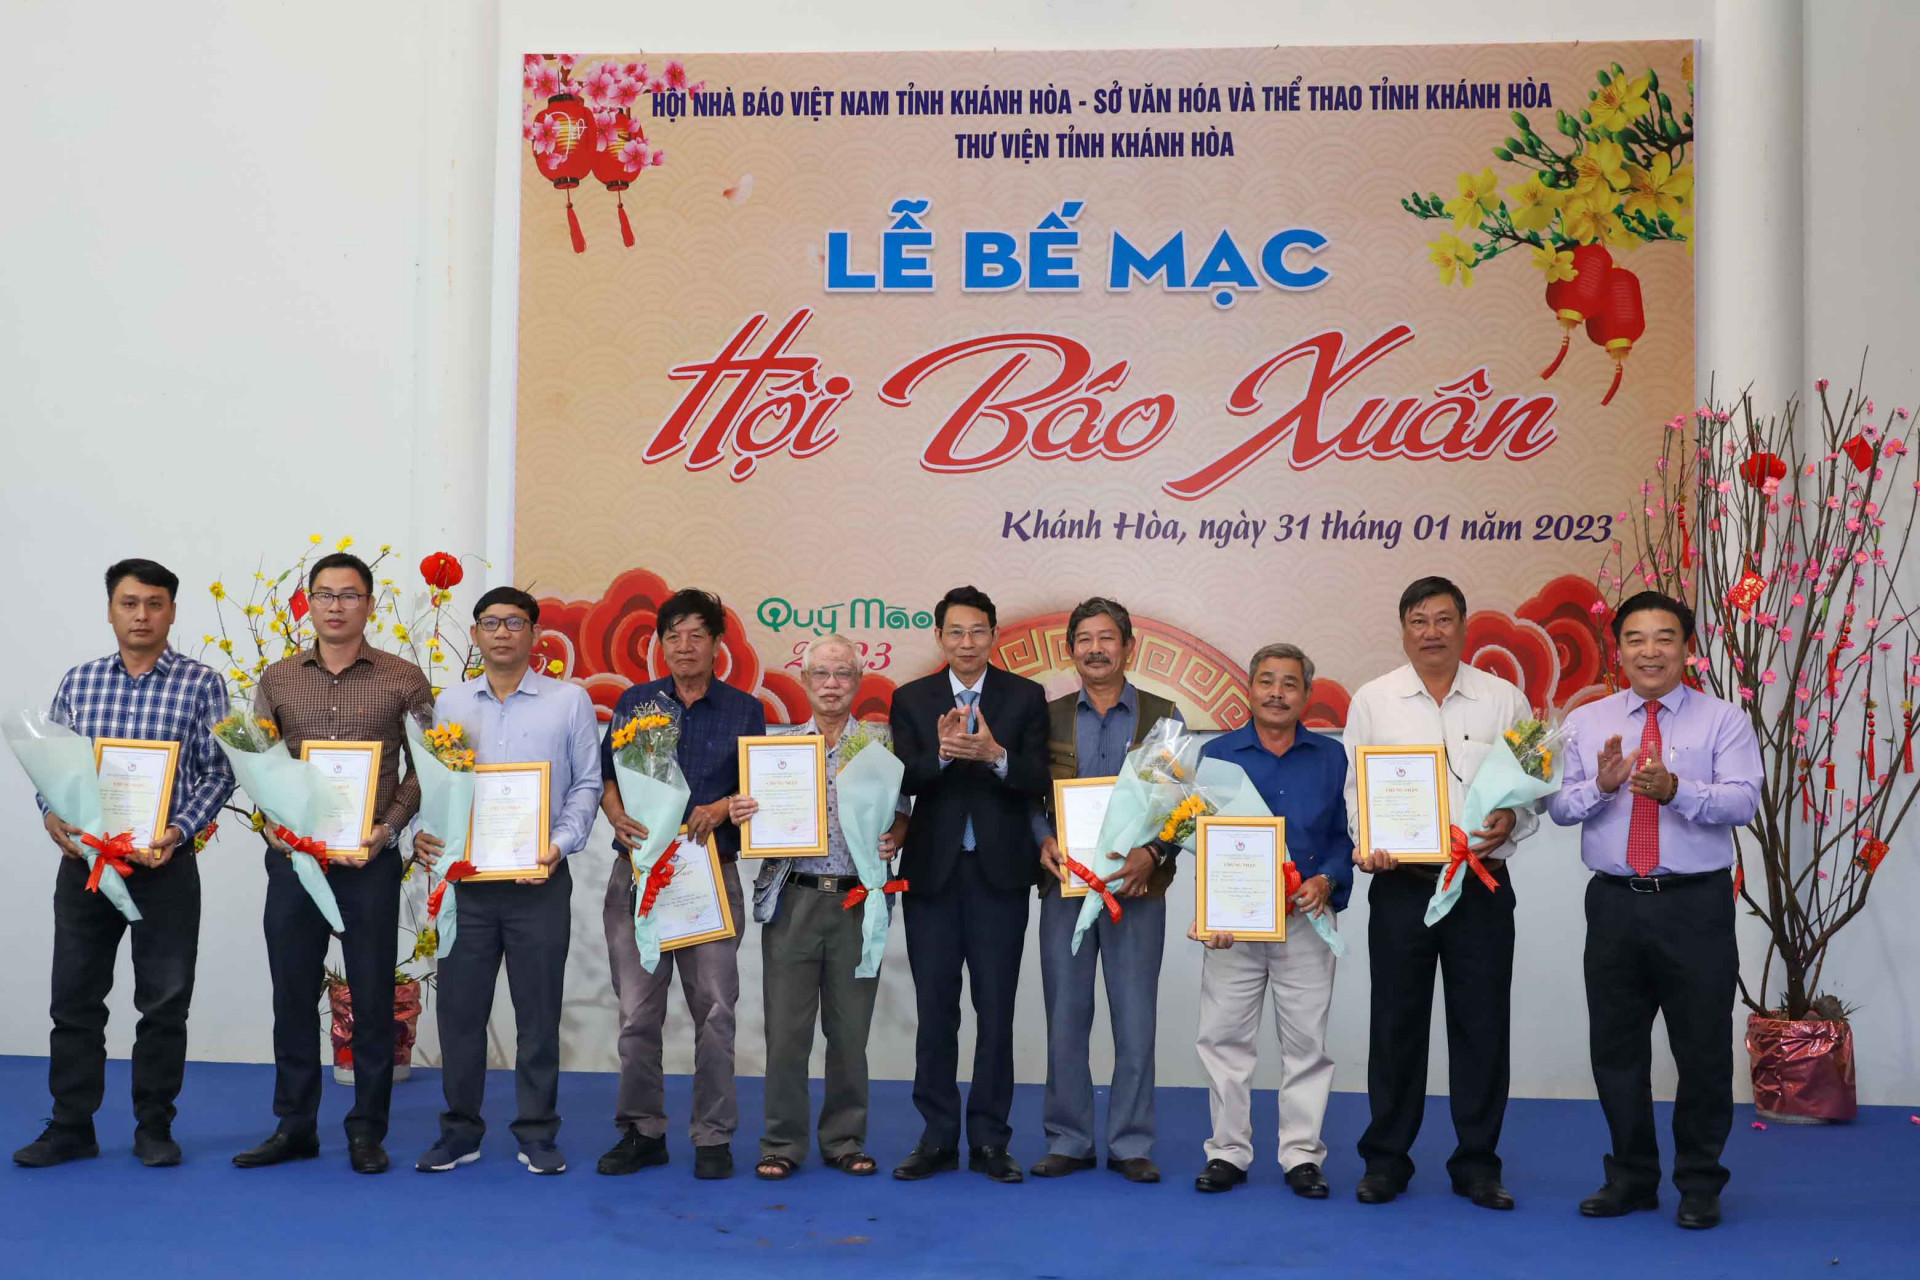 Dinh Van Thieu and the leader of Khanh Hoa Provincial Journalists’ Association awarding prizes to the journalists with excellent articles